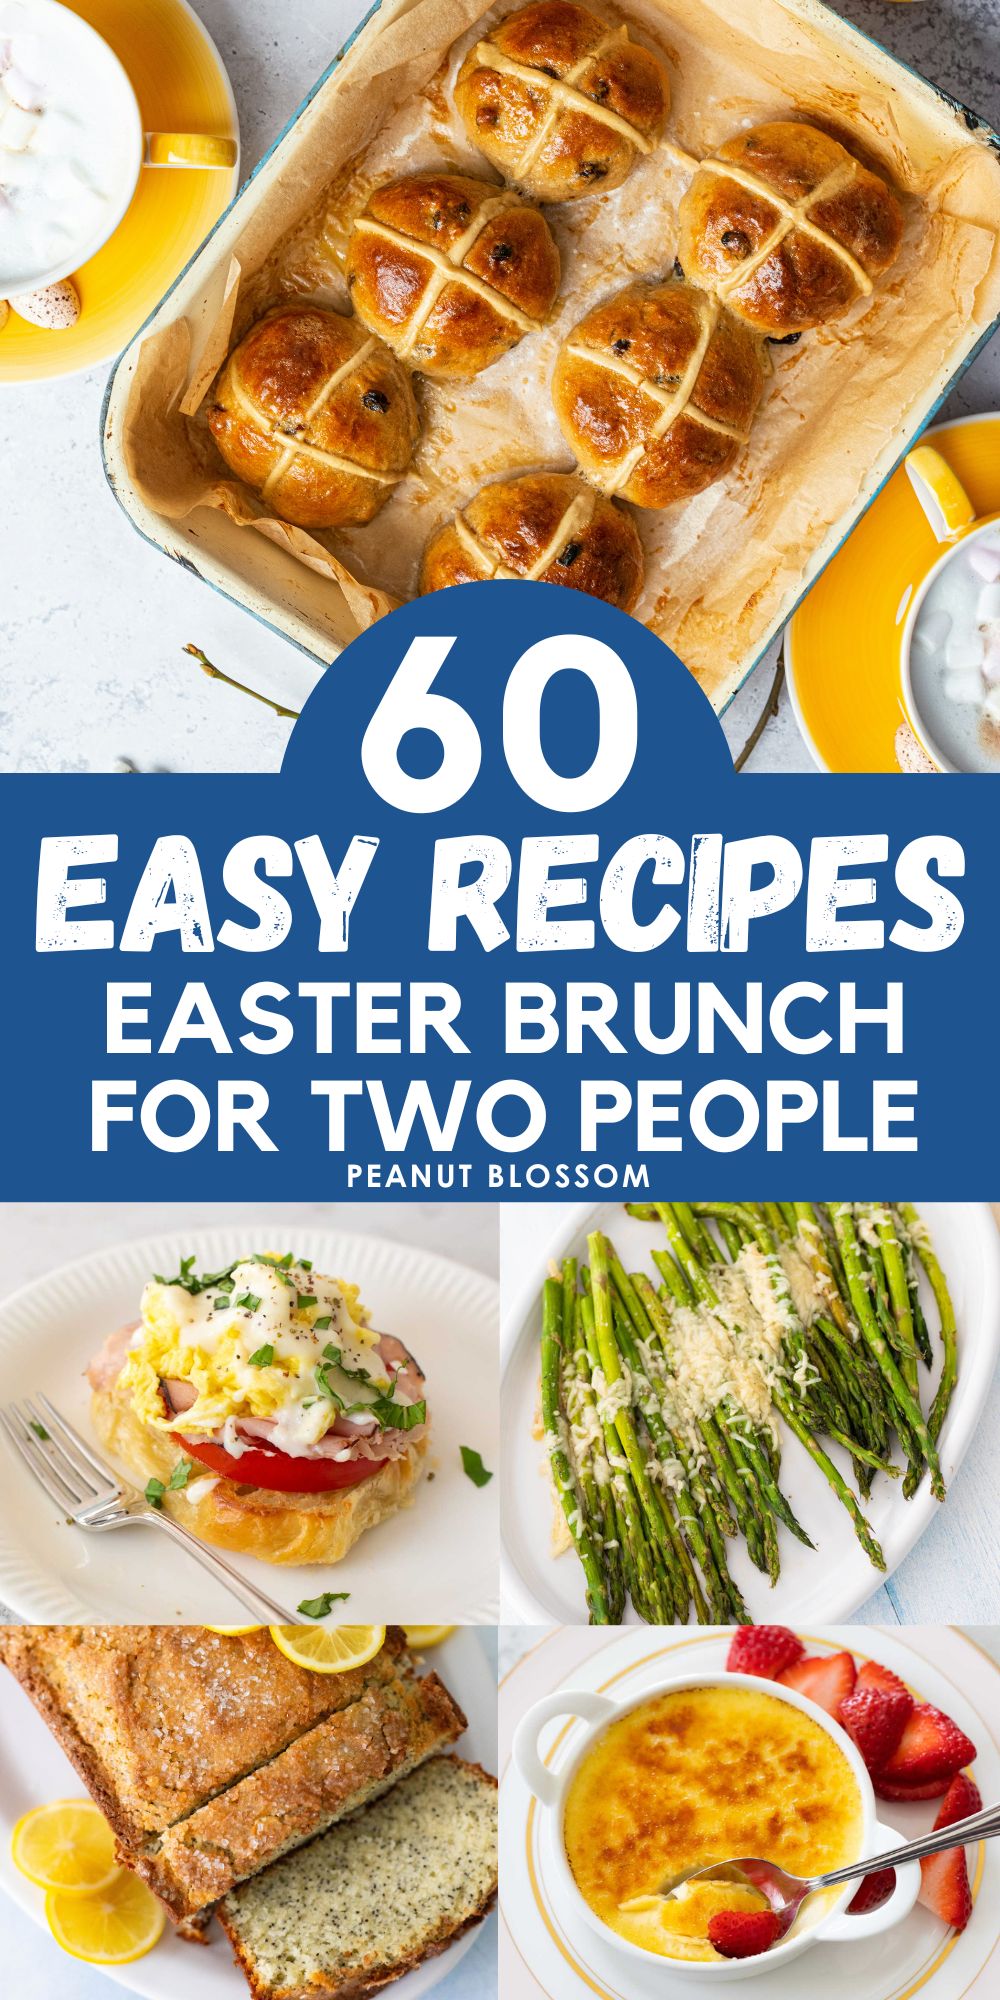 The photo collage shows easily scalable recipes for an Easter brunch for two.